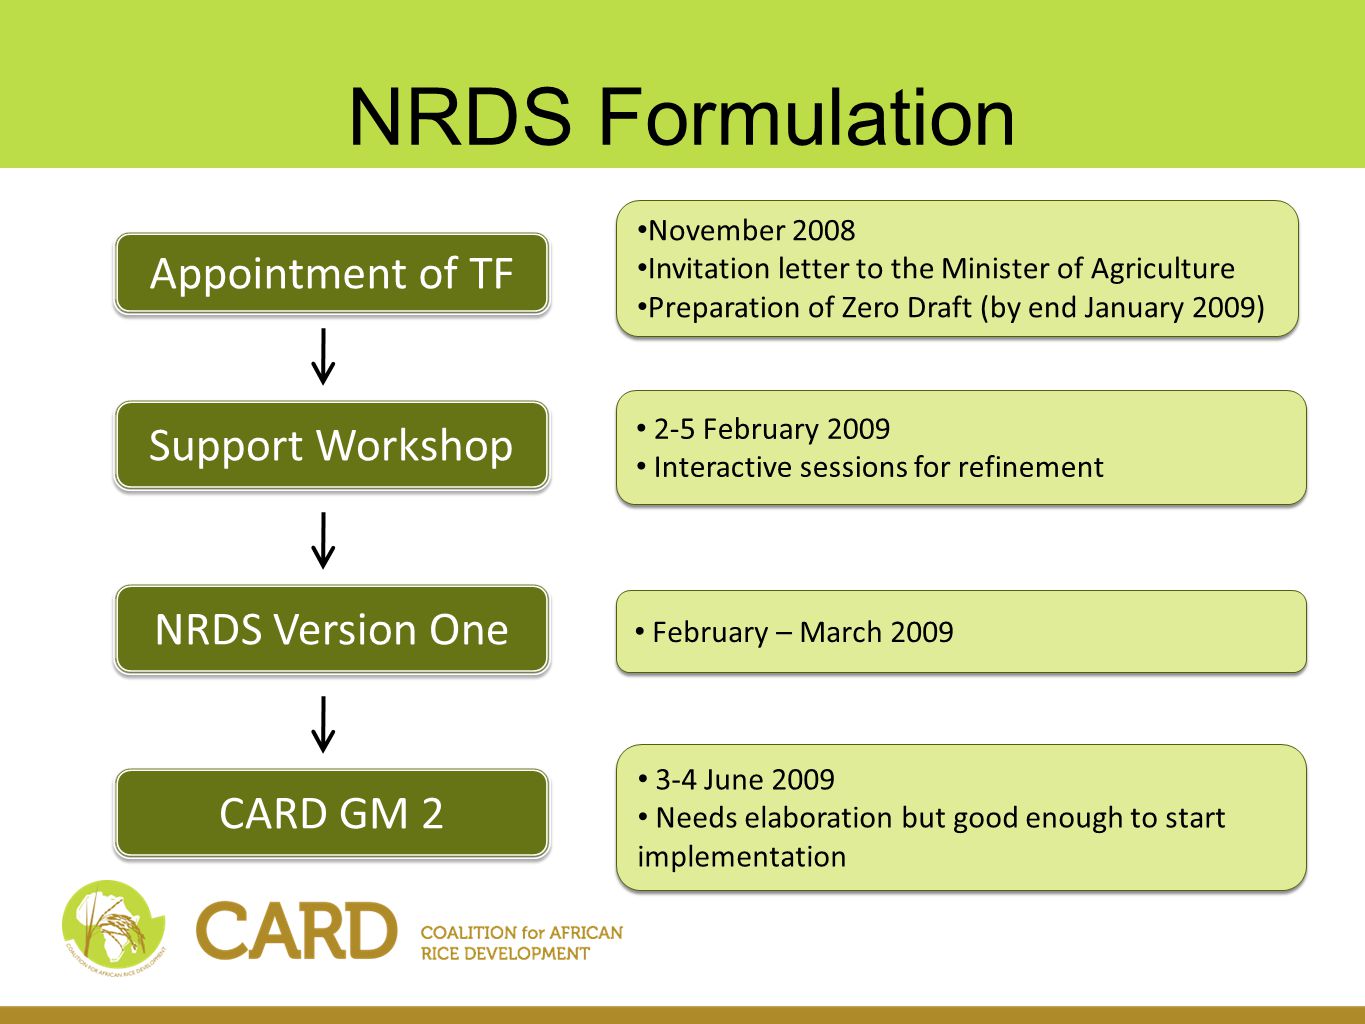 NRDS Formulation Appointment of TF Support Workshop November 2008 Invitation letter to the Minister of Agriculture Preparation of Zero Draft (by end January 2009) November 2008 Invitation letter to the Minister of Agriculture Preparation of Zero Draft (by end January 2009) 2-5 February 2009 Interactive sessions for refinement 2-5 February 2009 Interactive sessions for refinement NRDS Version One February – March 2009 CARD GM June 2009 Needs elaboration but good enough to start implementation 3-4 June 2009 Needs elaboration but good enough to start implementation